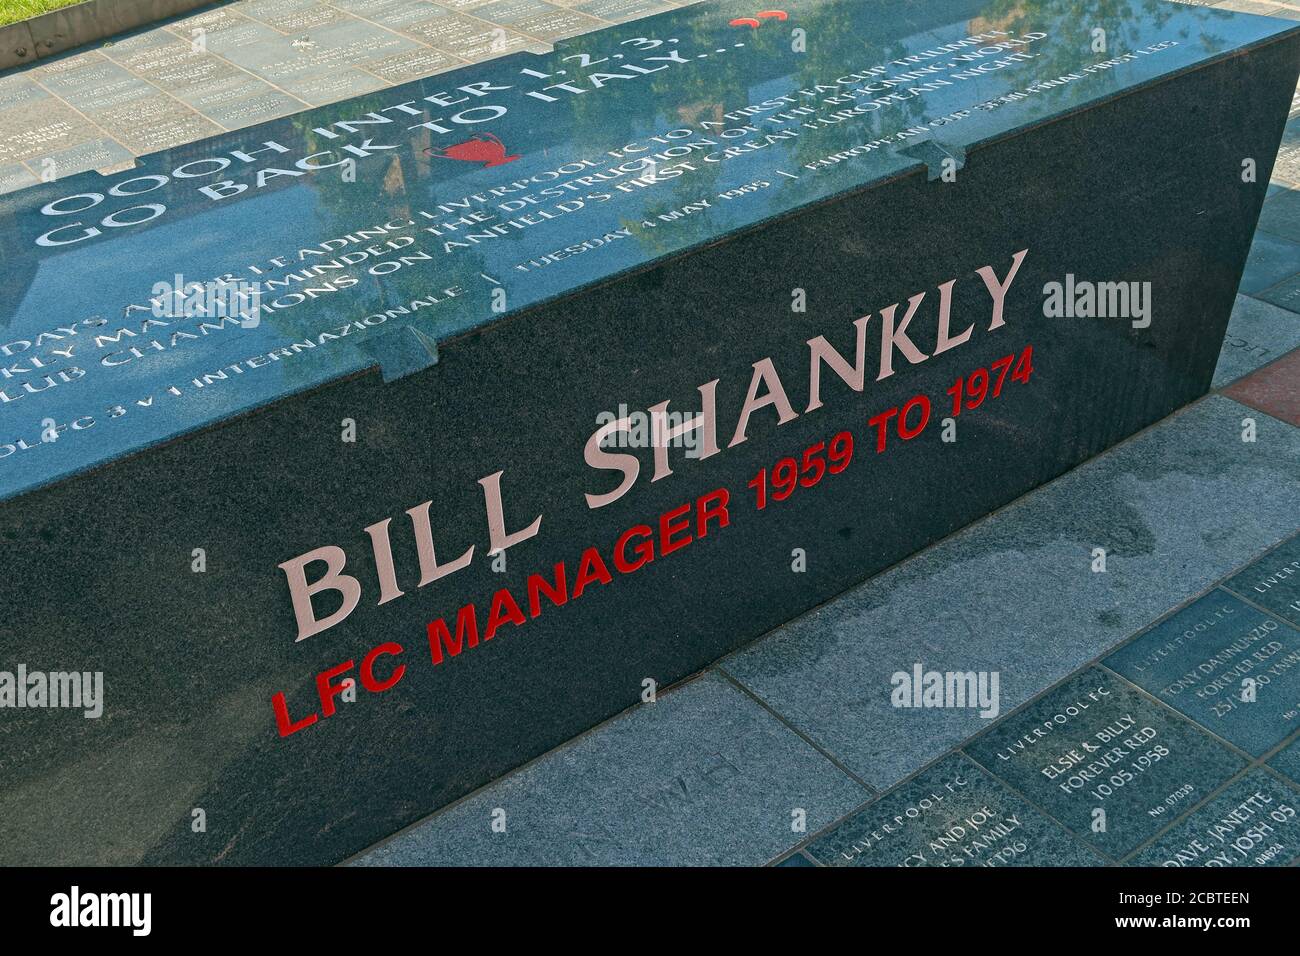 Bill Shankly Stone 1959-1974, LFC, Liverpool football Club, Anfield, Premier League, Merseyside, Angleterre du Nord-Ouest, Royaume-Uni, L4 2UZ Banque D'Images